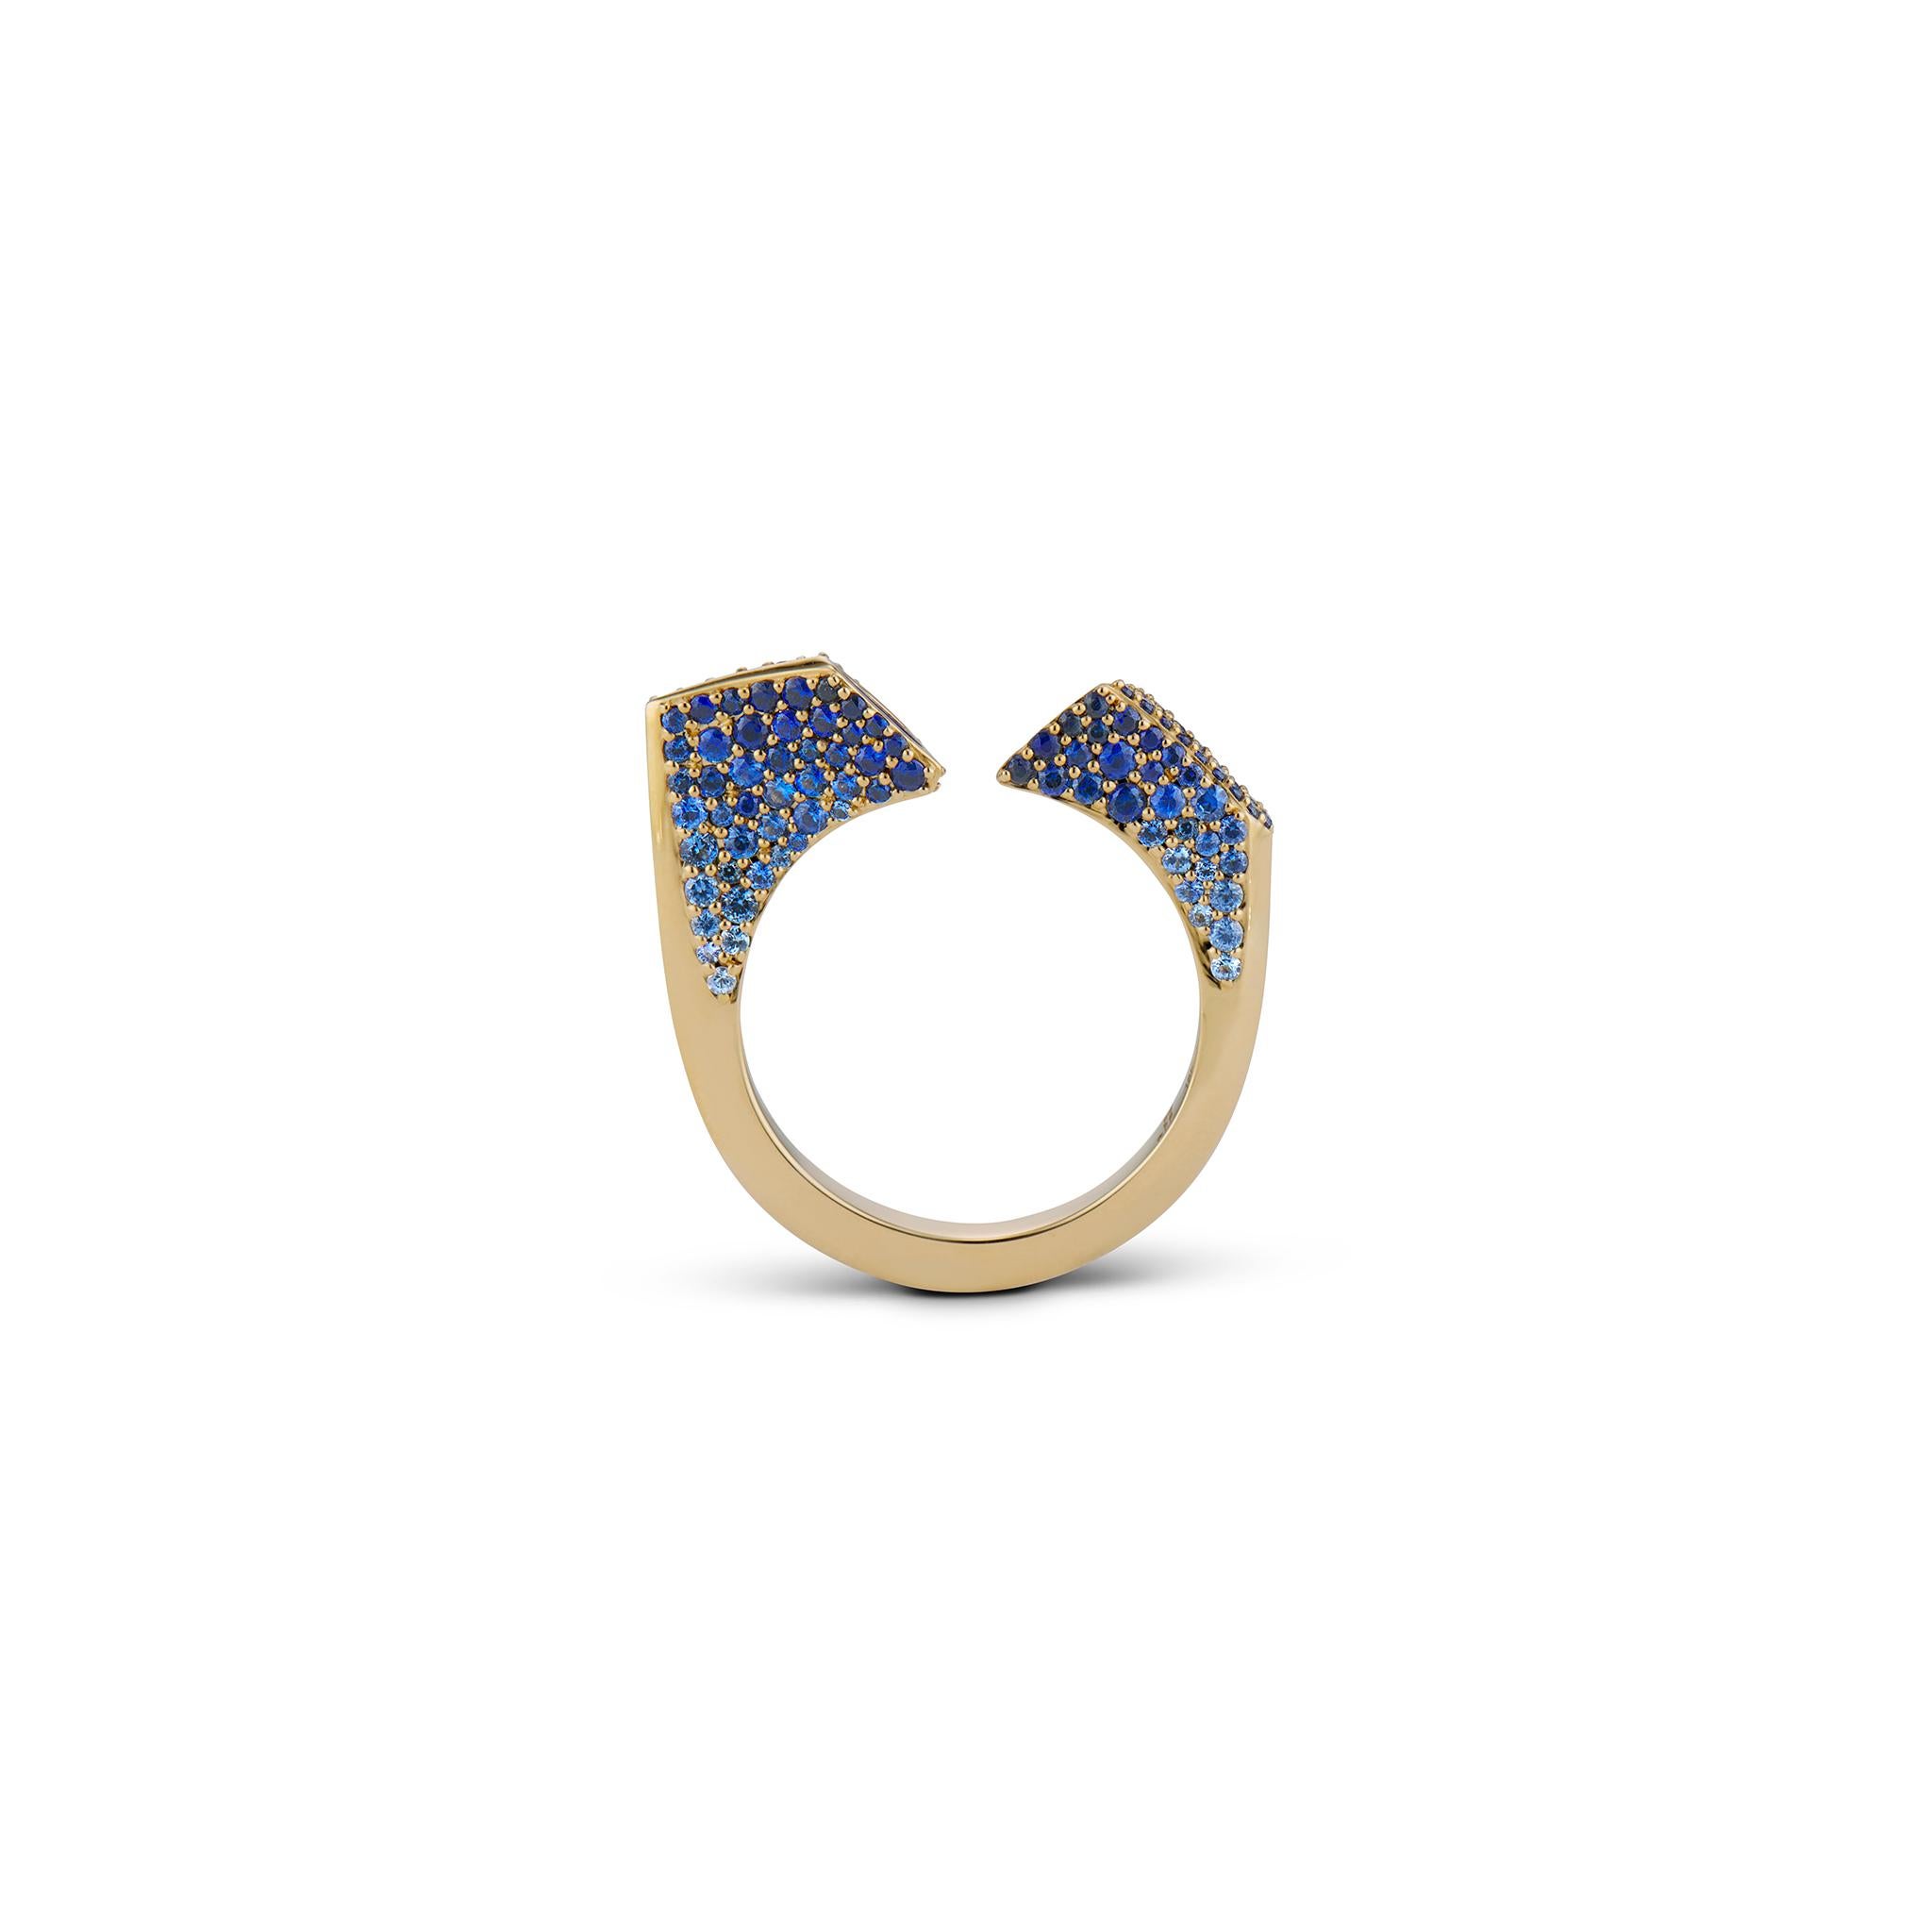 The AERIAL FORTIA ring exudes a captivating sense of power, skillfully manifested through its architectural lines and multifaceted angles, each offering a unique perspective. This ring embodies the inner strength we discover when we pause to reflect